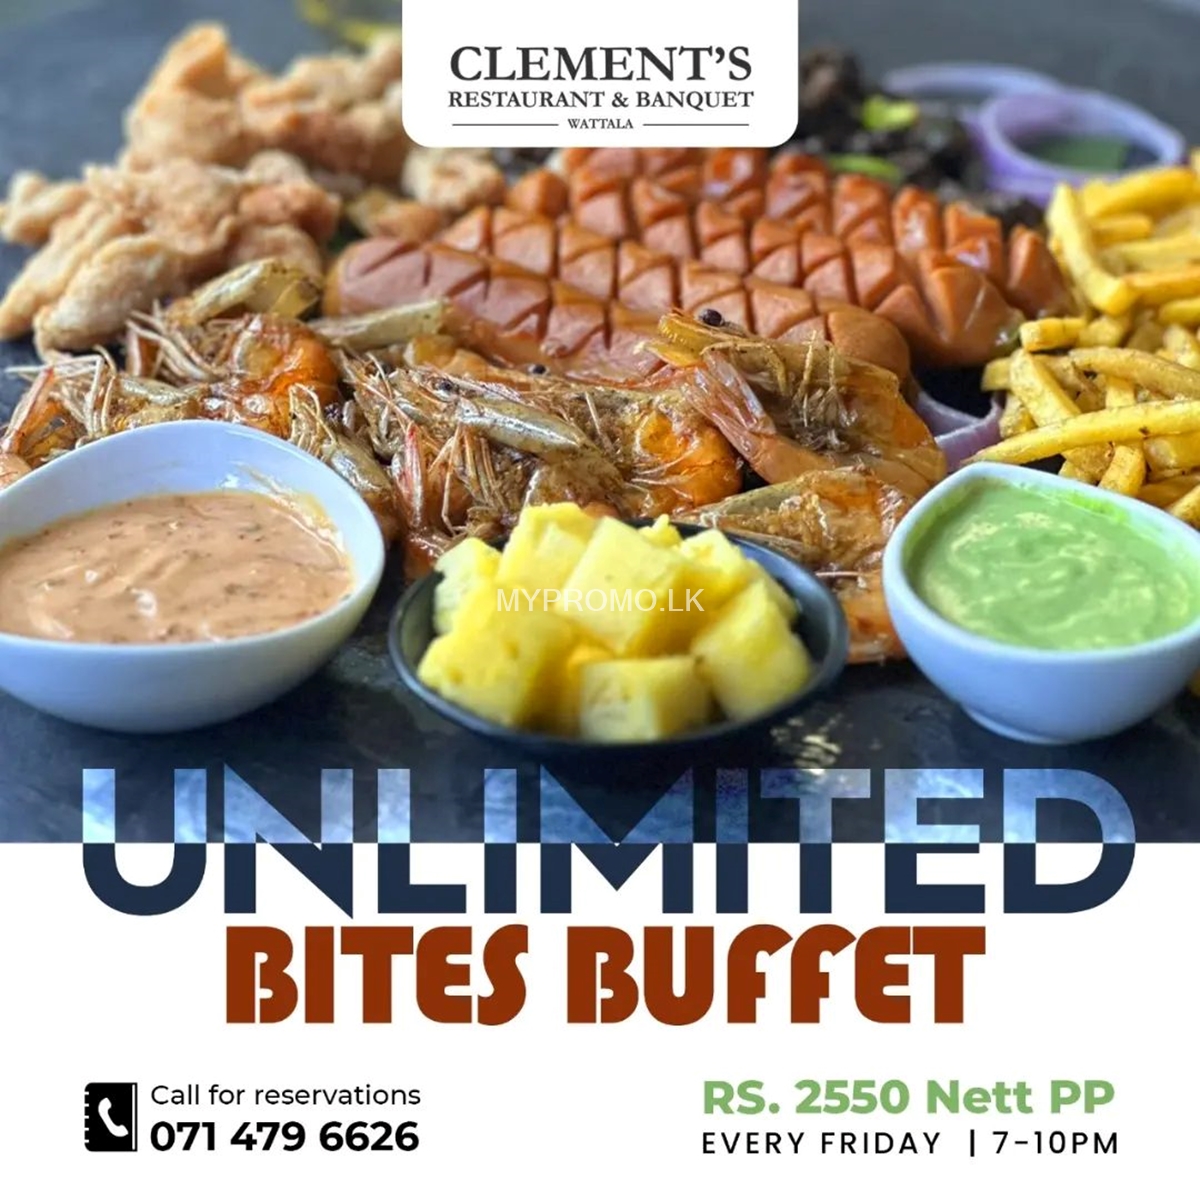 Unlimited Bites Buffet at Clement's Restaurant and Banquet